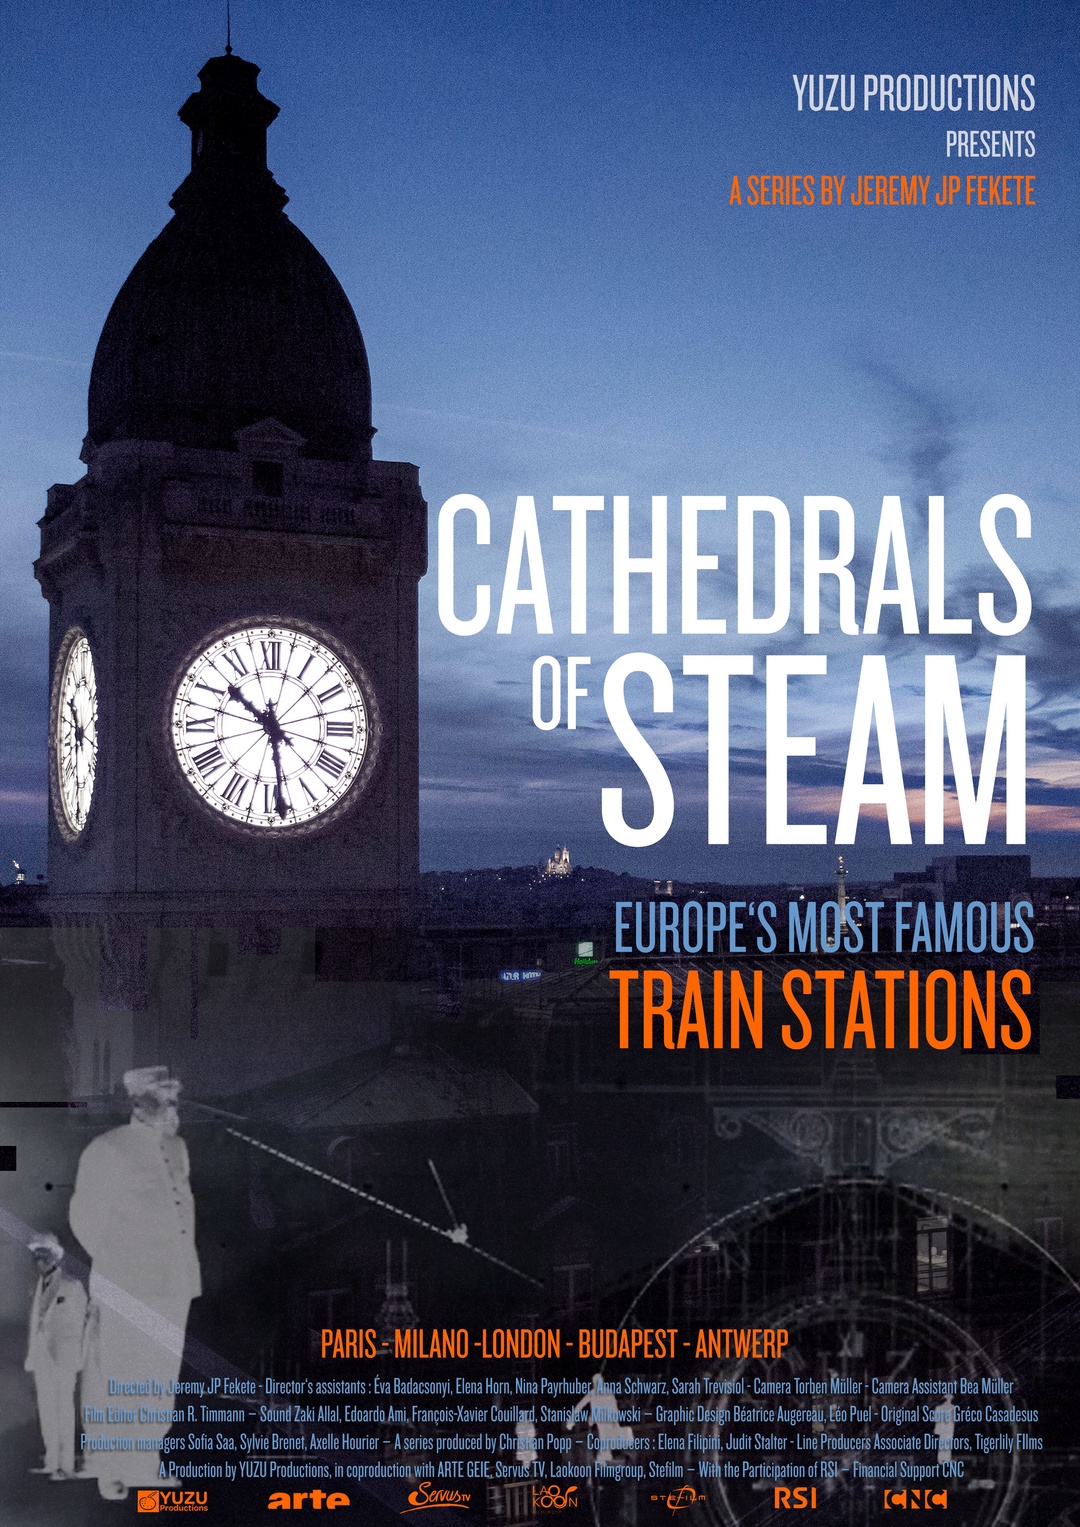 The Cathedrals of Steam - Europe's Railway Stations